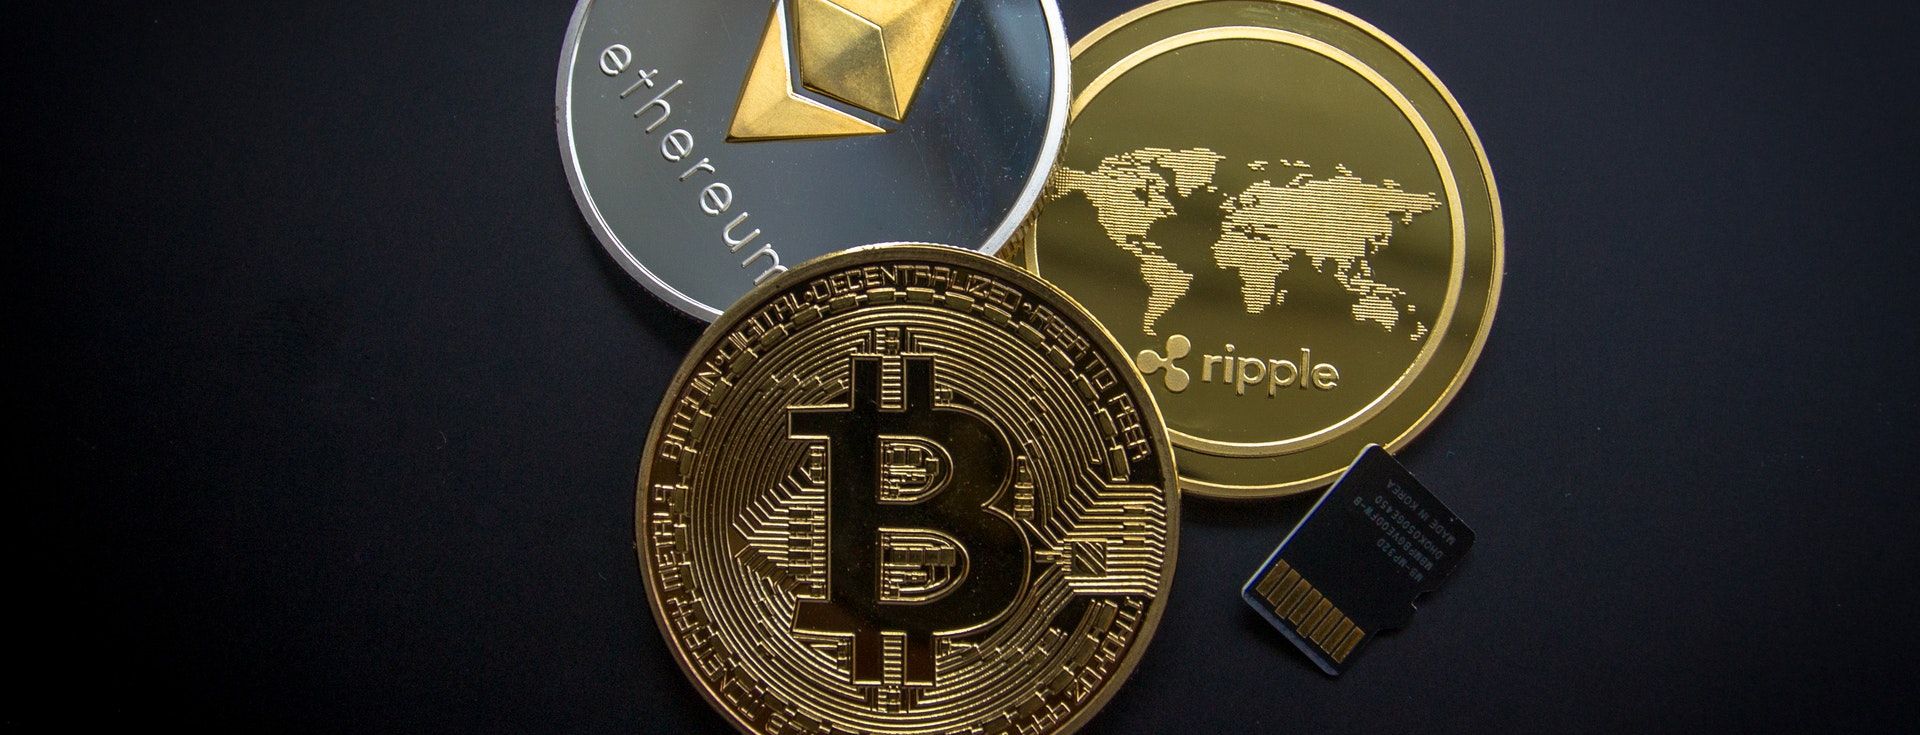 Cryptocurrency: $14 billion in fraud in 2021